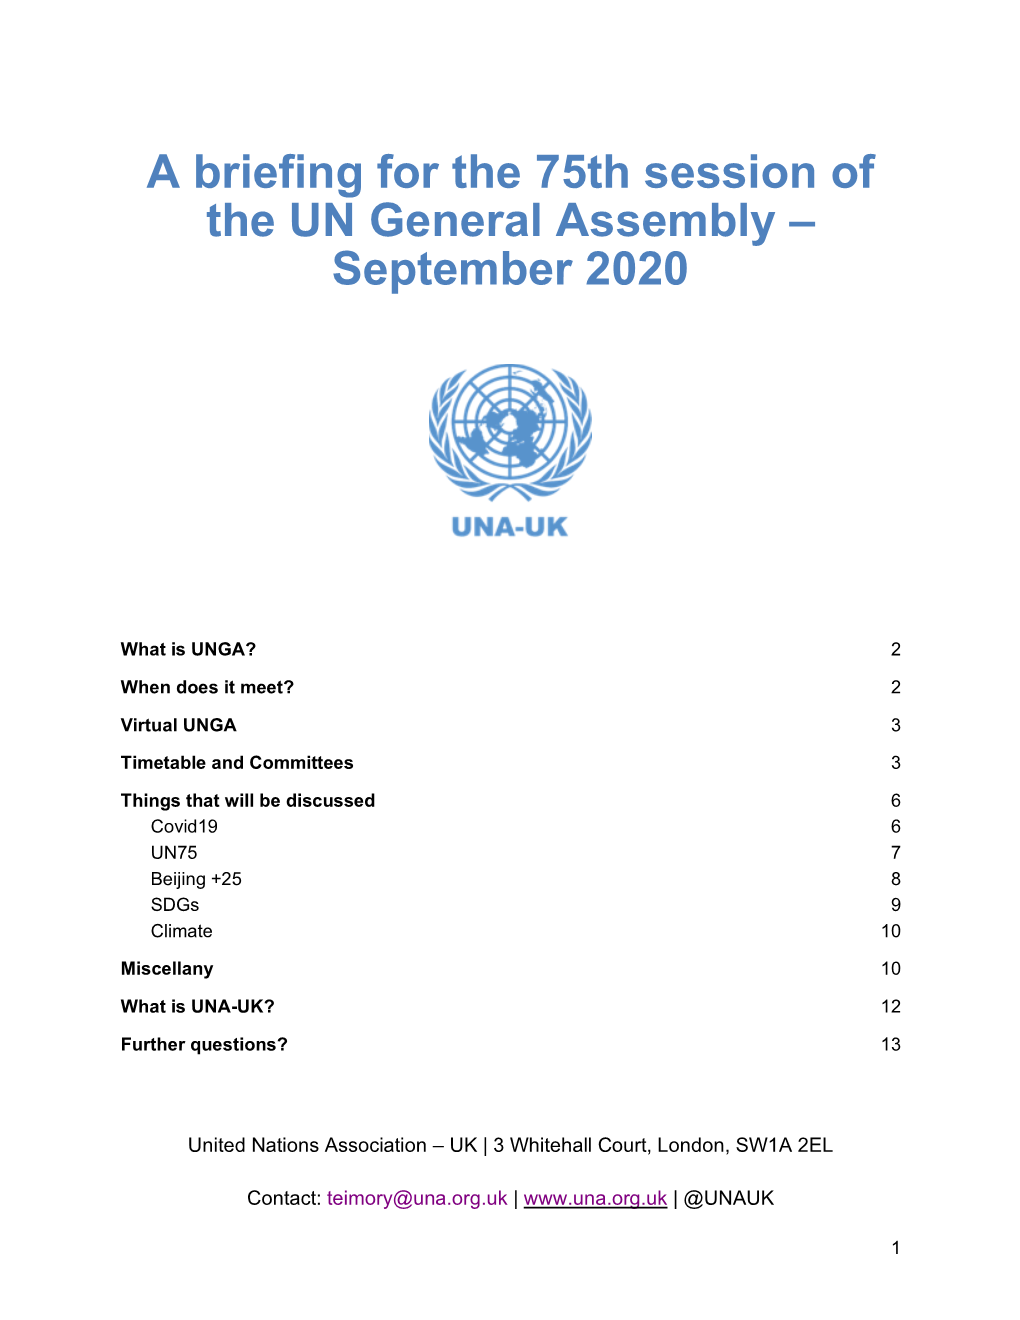 A Briefing for the 75Th Session of the UN General Assembly – September 2020